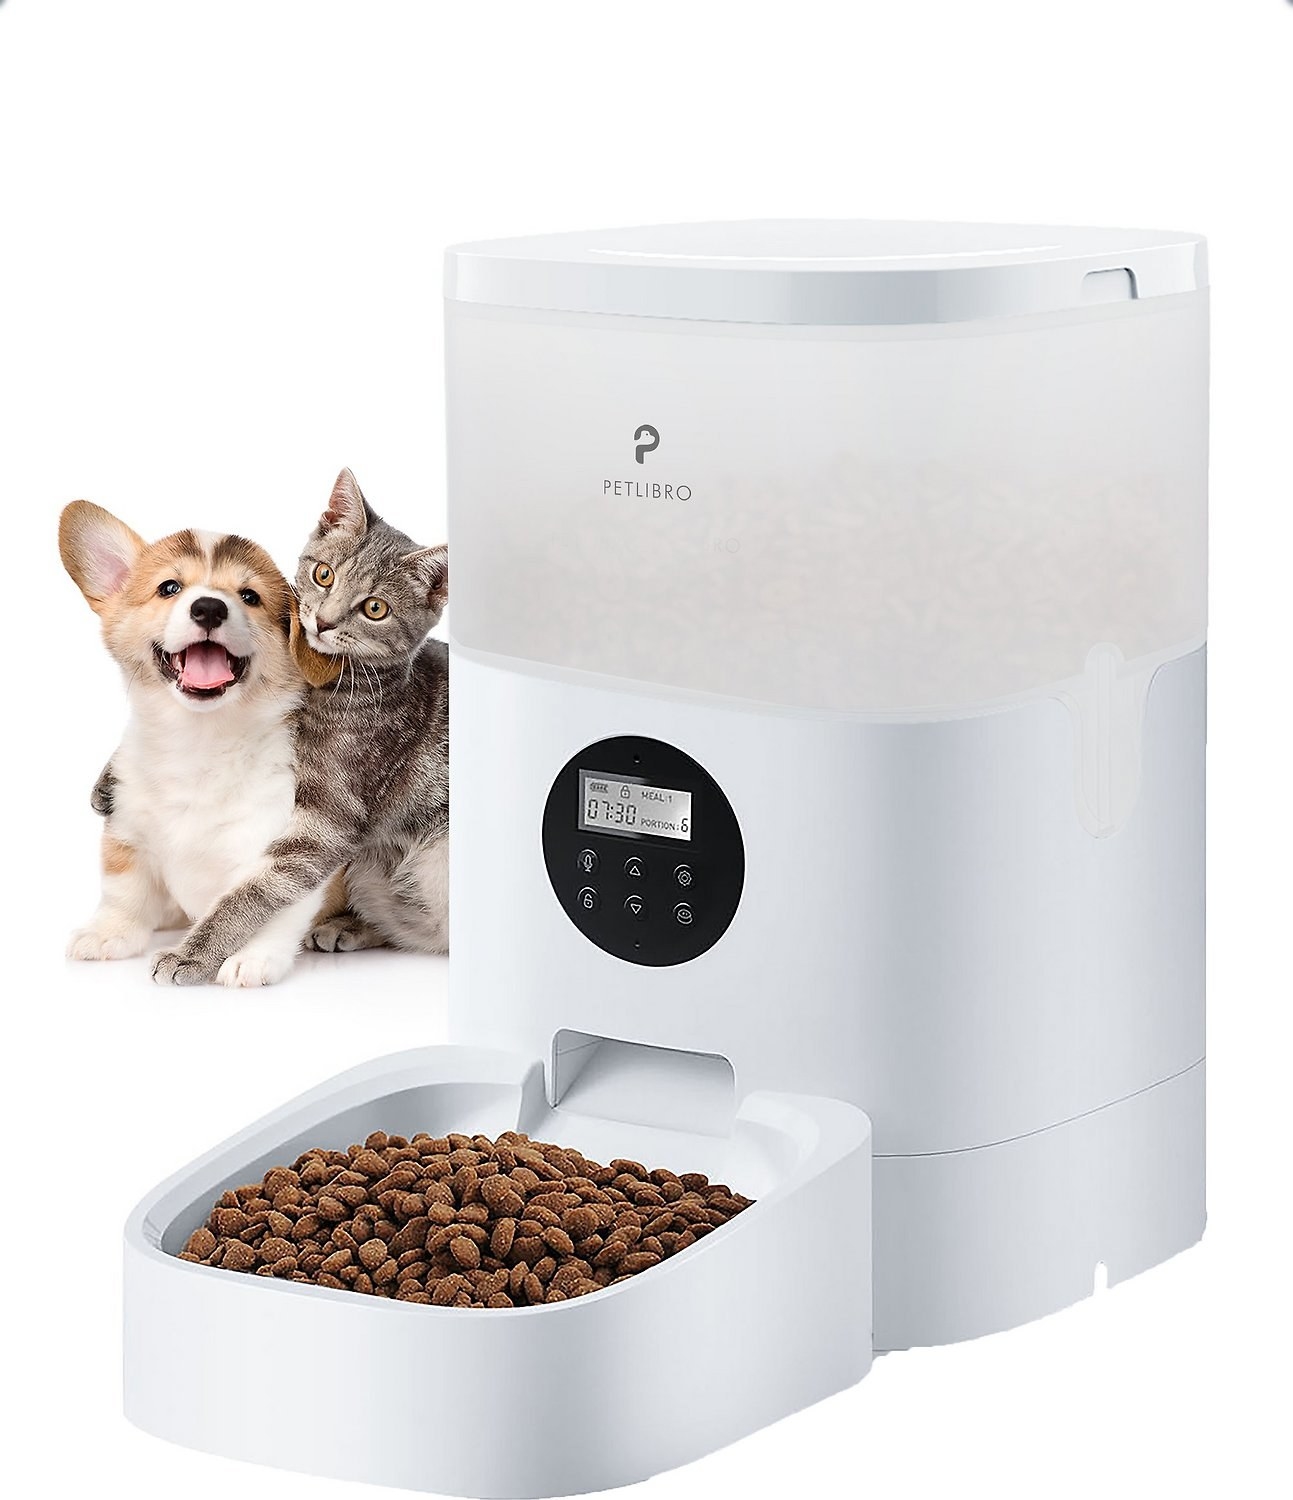 white automatic pet feeder with cat and dog in the background